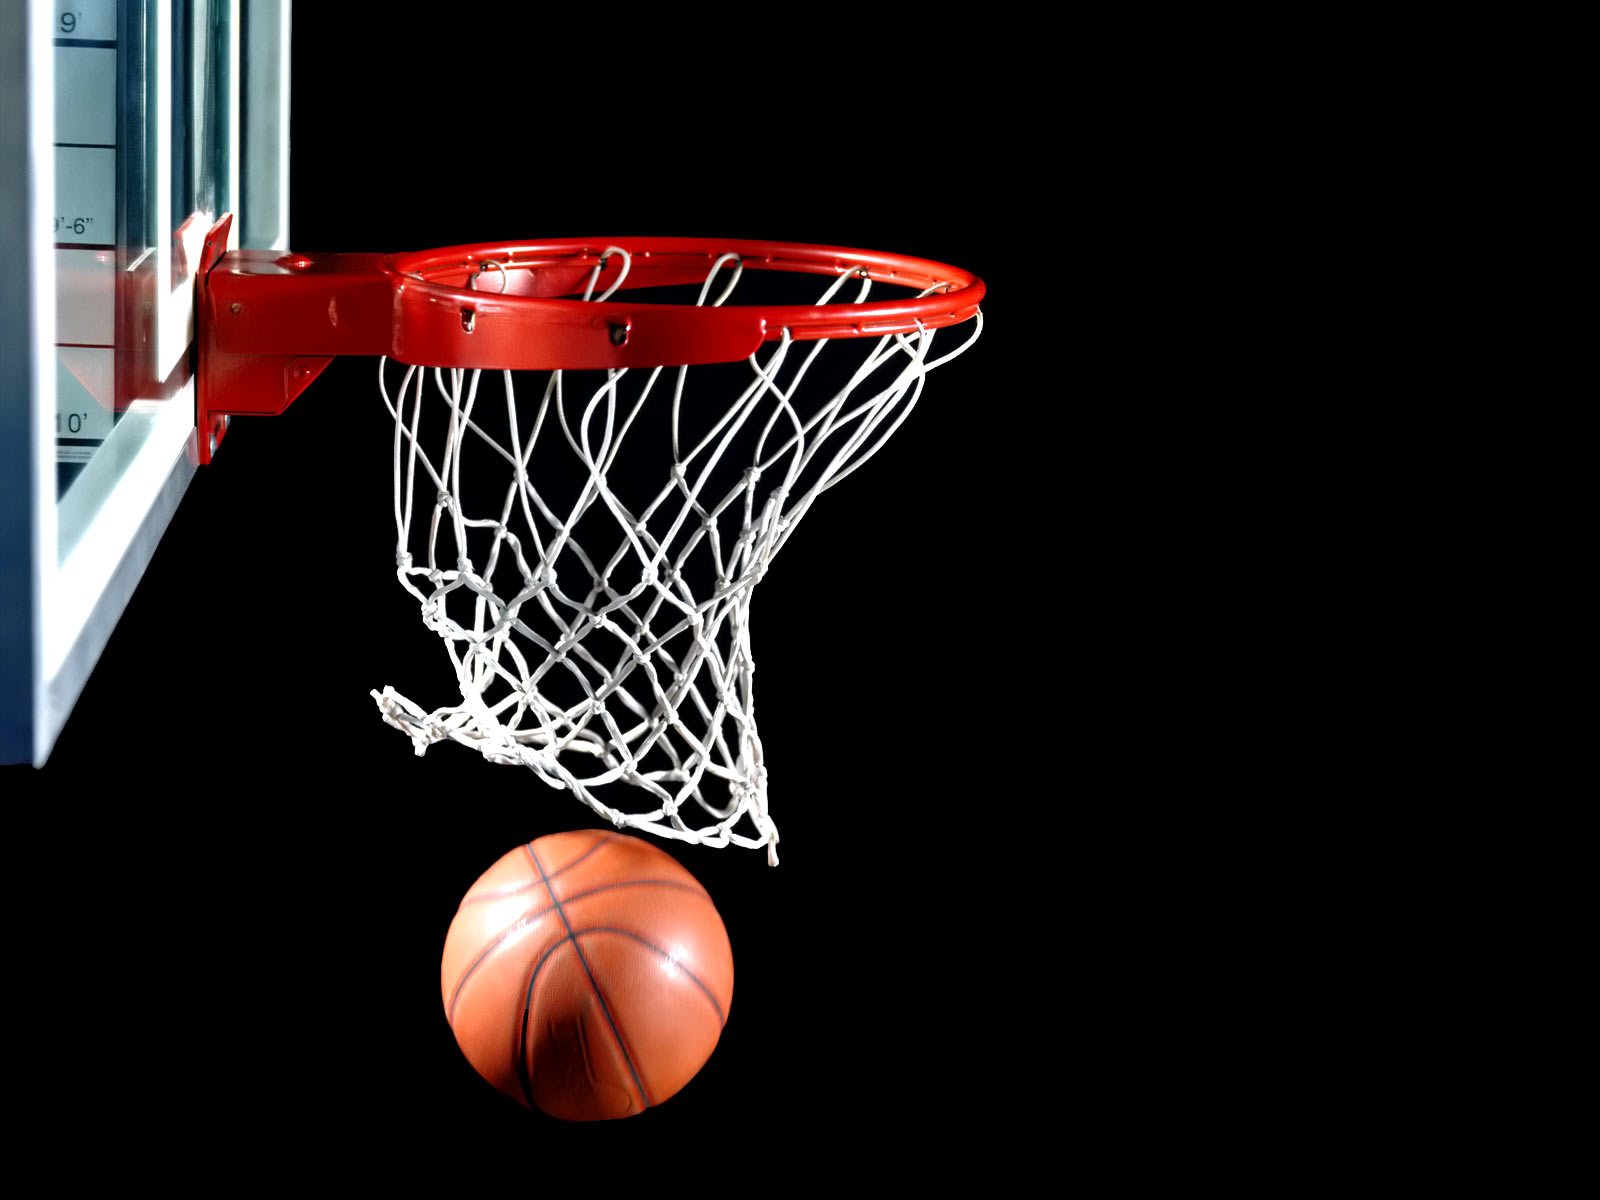 Score: College Hoops 2010points Education 0 | LearnLong Blog